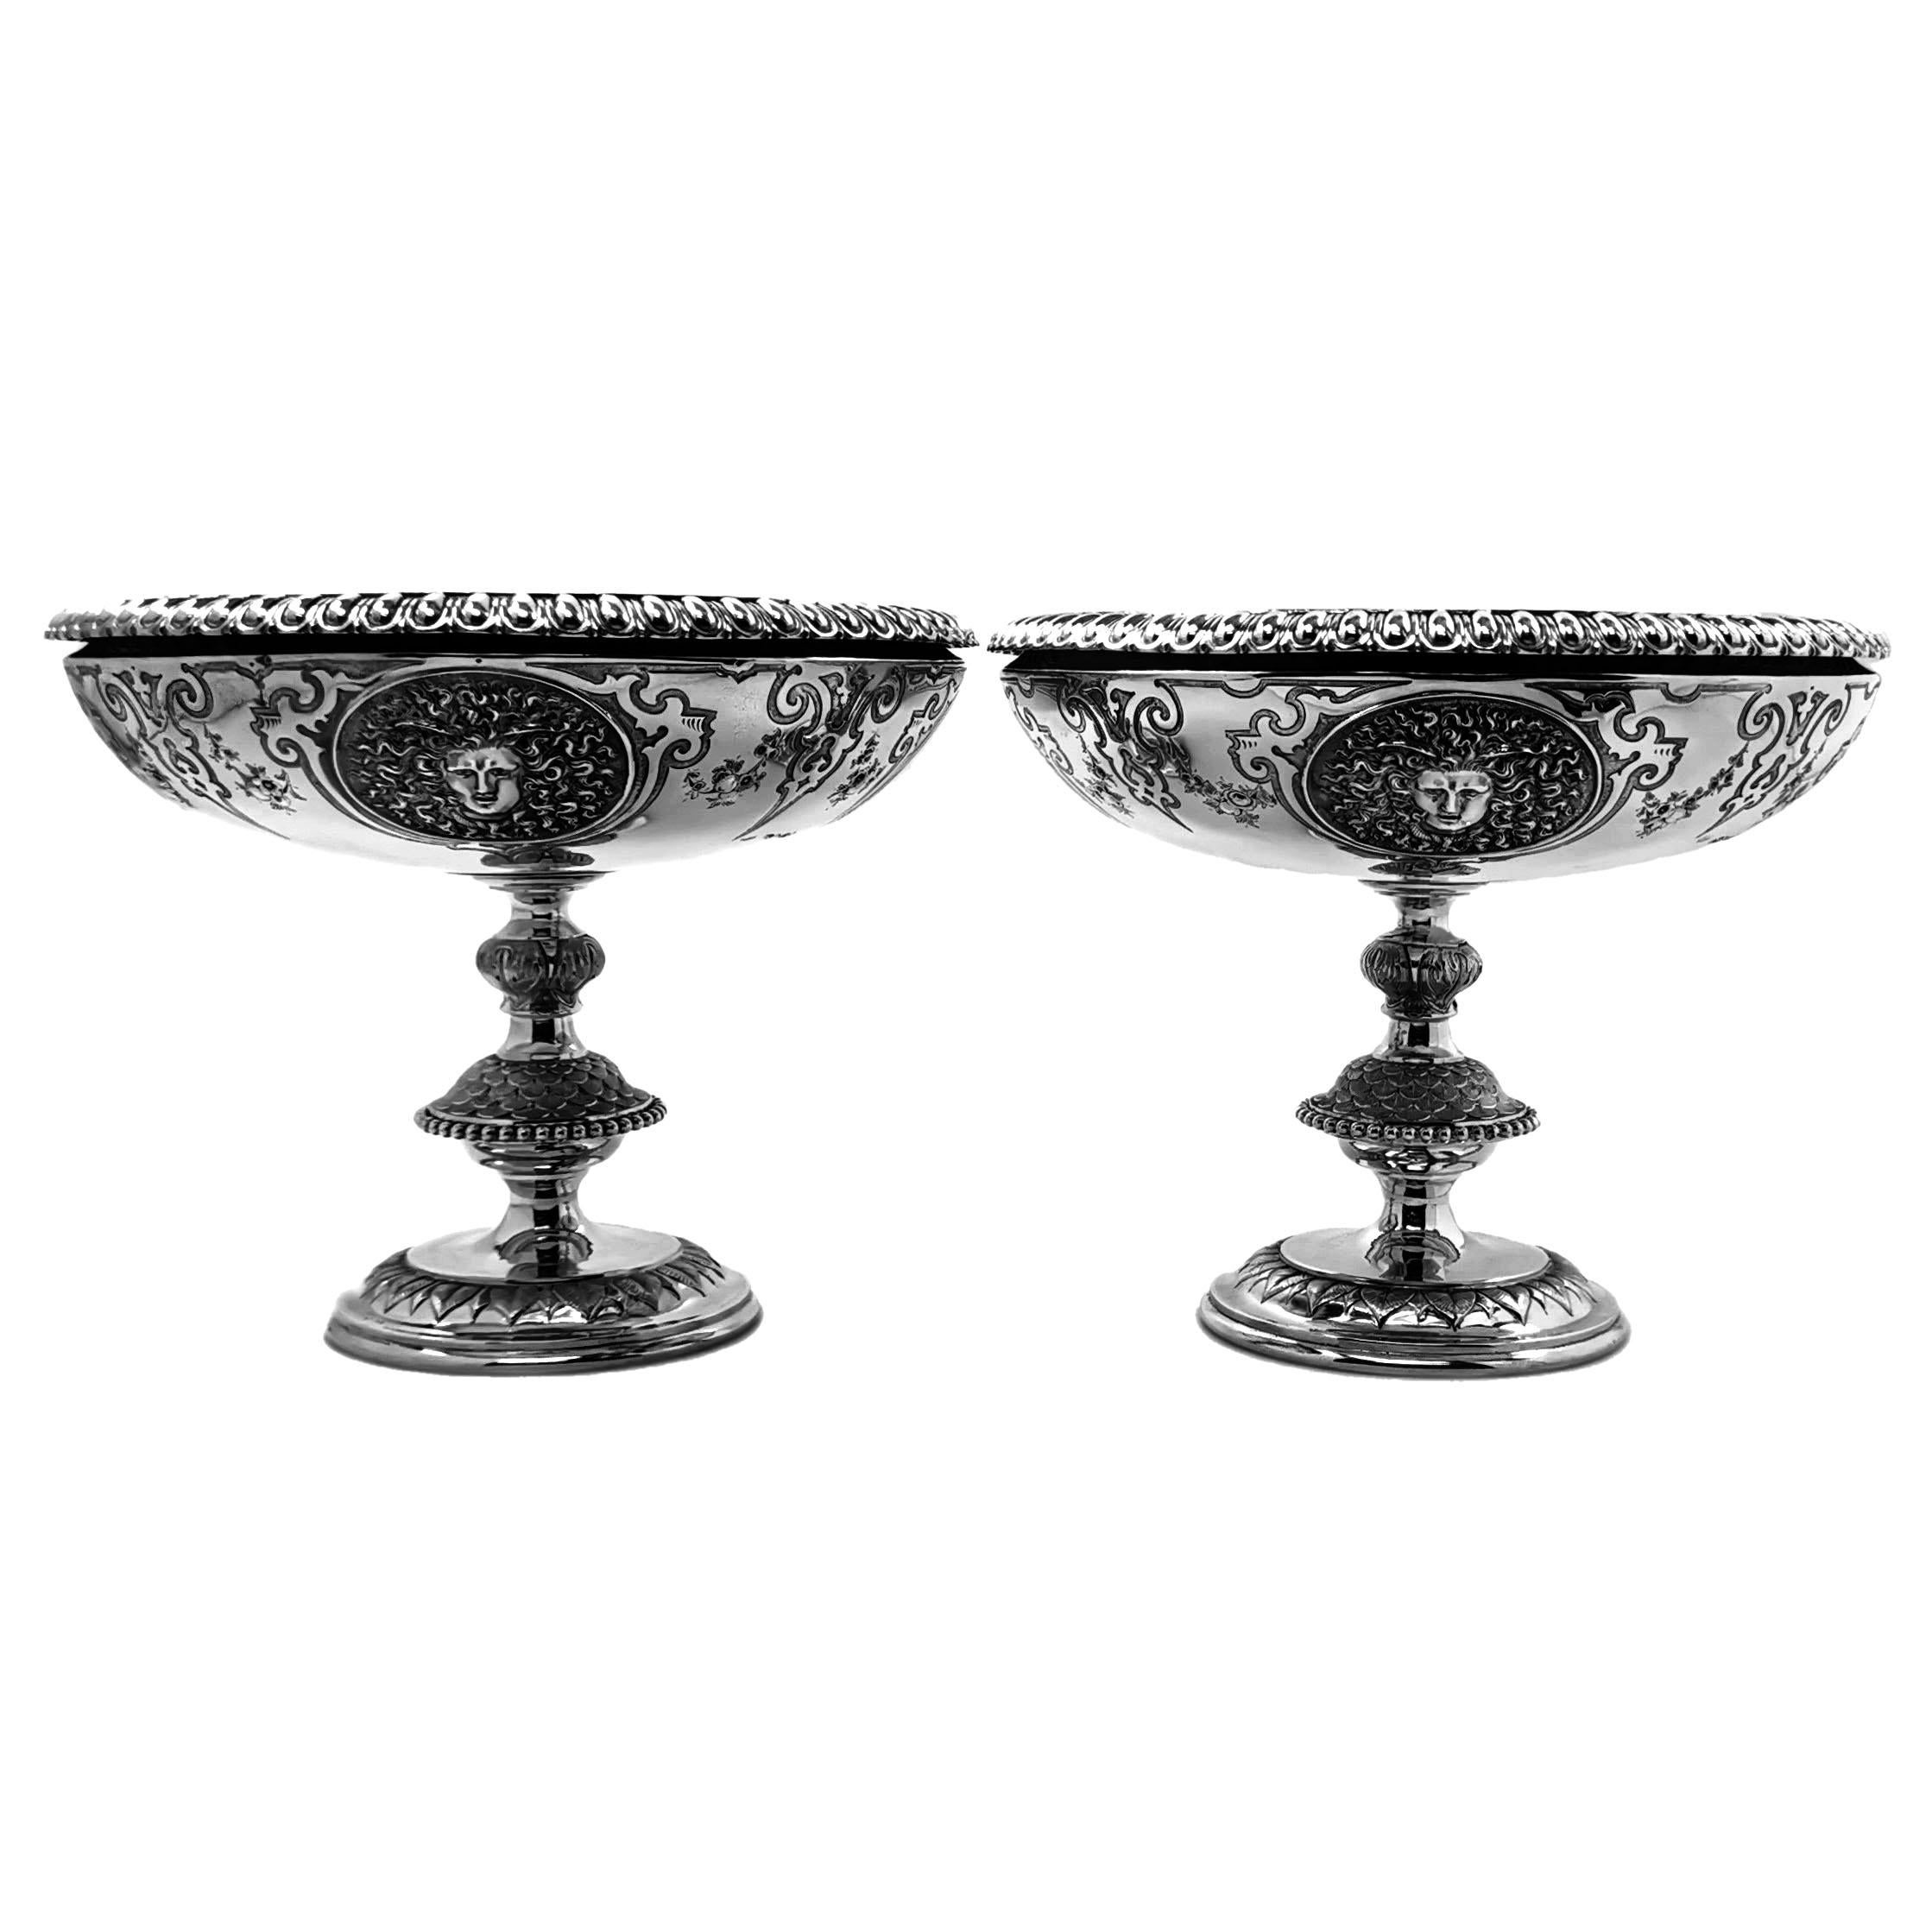 A pair of impressive Antique Solid Silver Comports standing impressive ornate knopped columns. The Bowls of the Comports have a pair of blank cartouches alternating with a pair of beautifully chased classical faces. The spread foot and column of